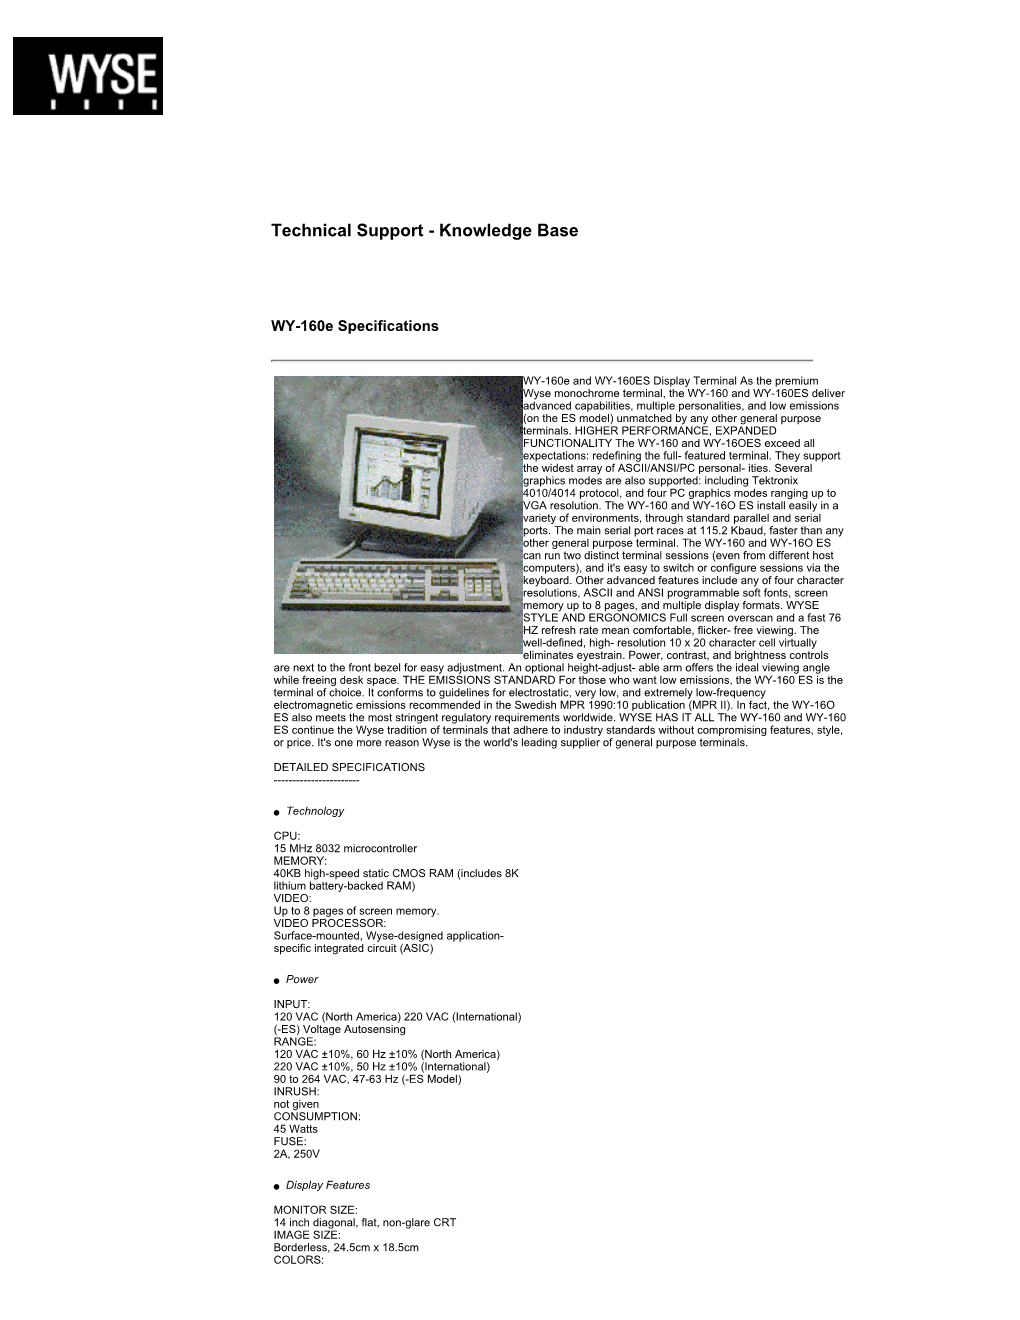 Technical Support Knowledge Base (Wyse Terminals Specifications)